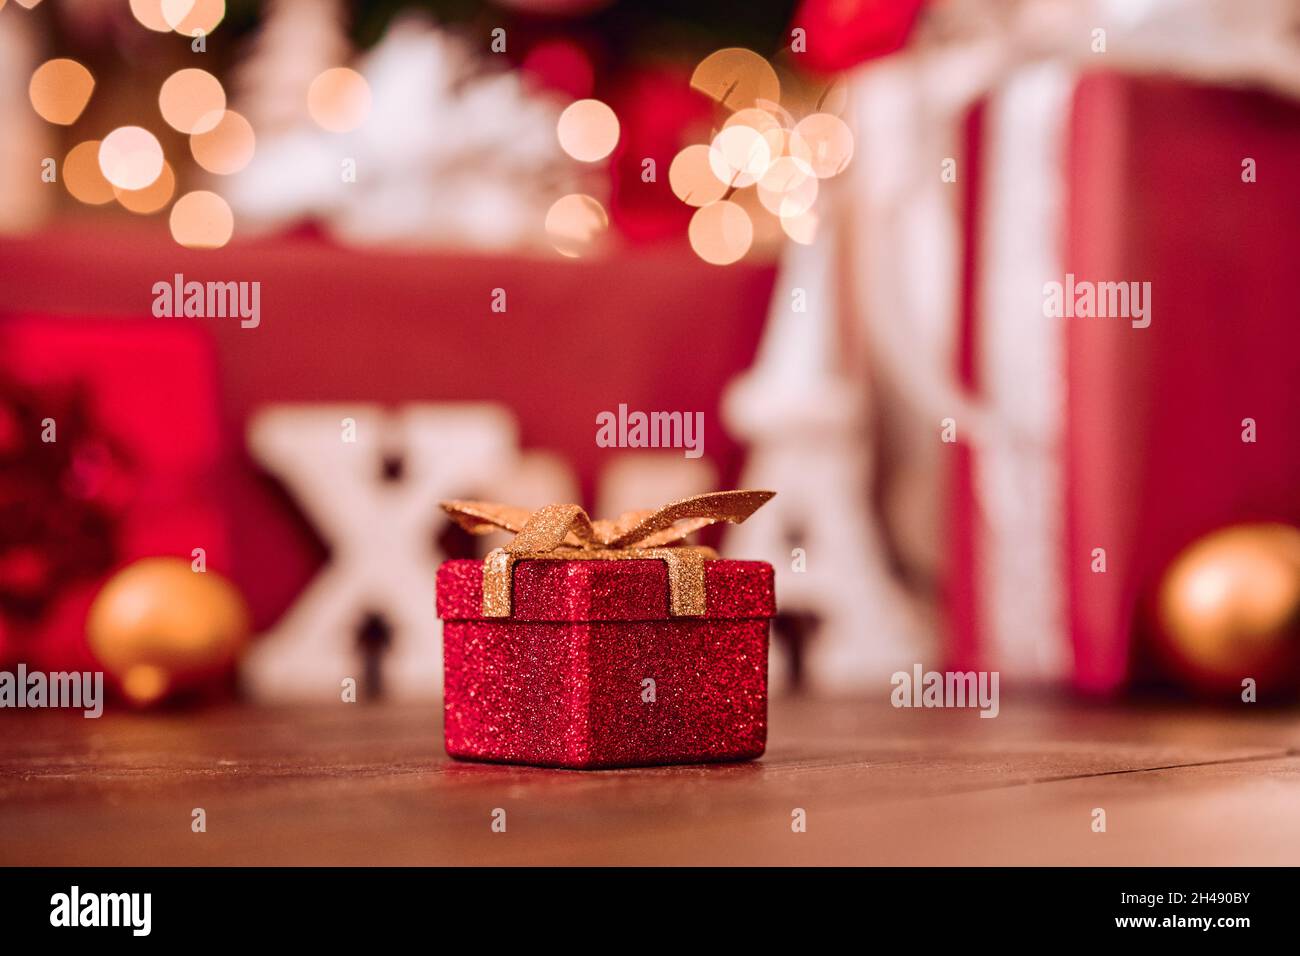 Small red Xmas present gift box under Christmas tree background. Stock Photo